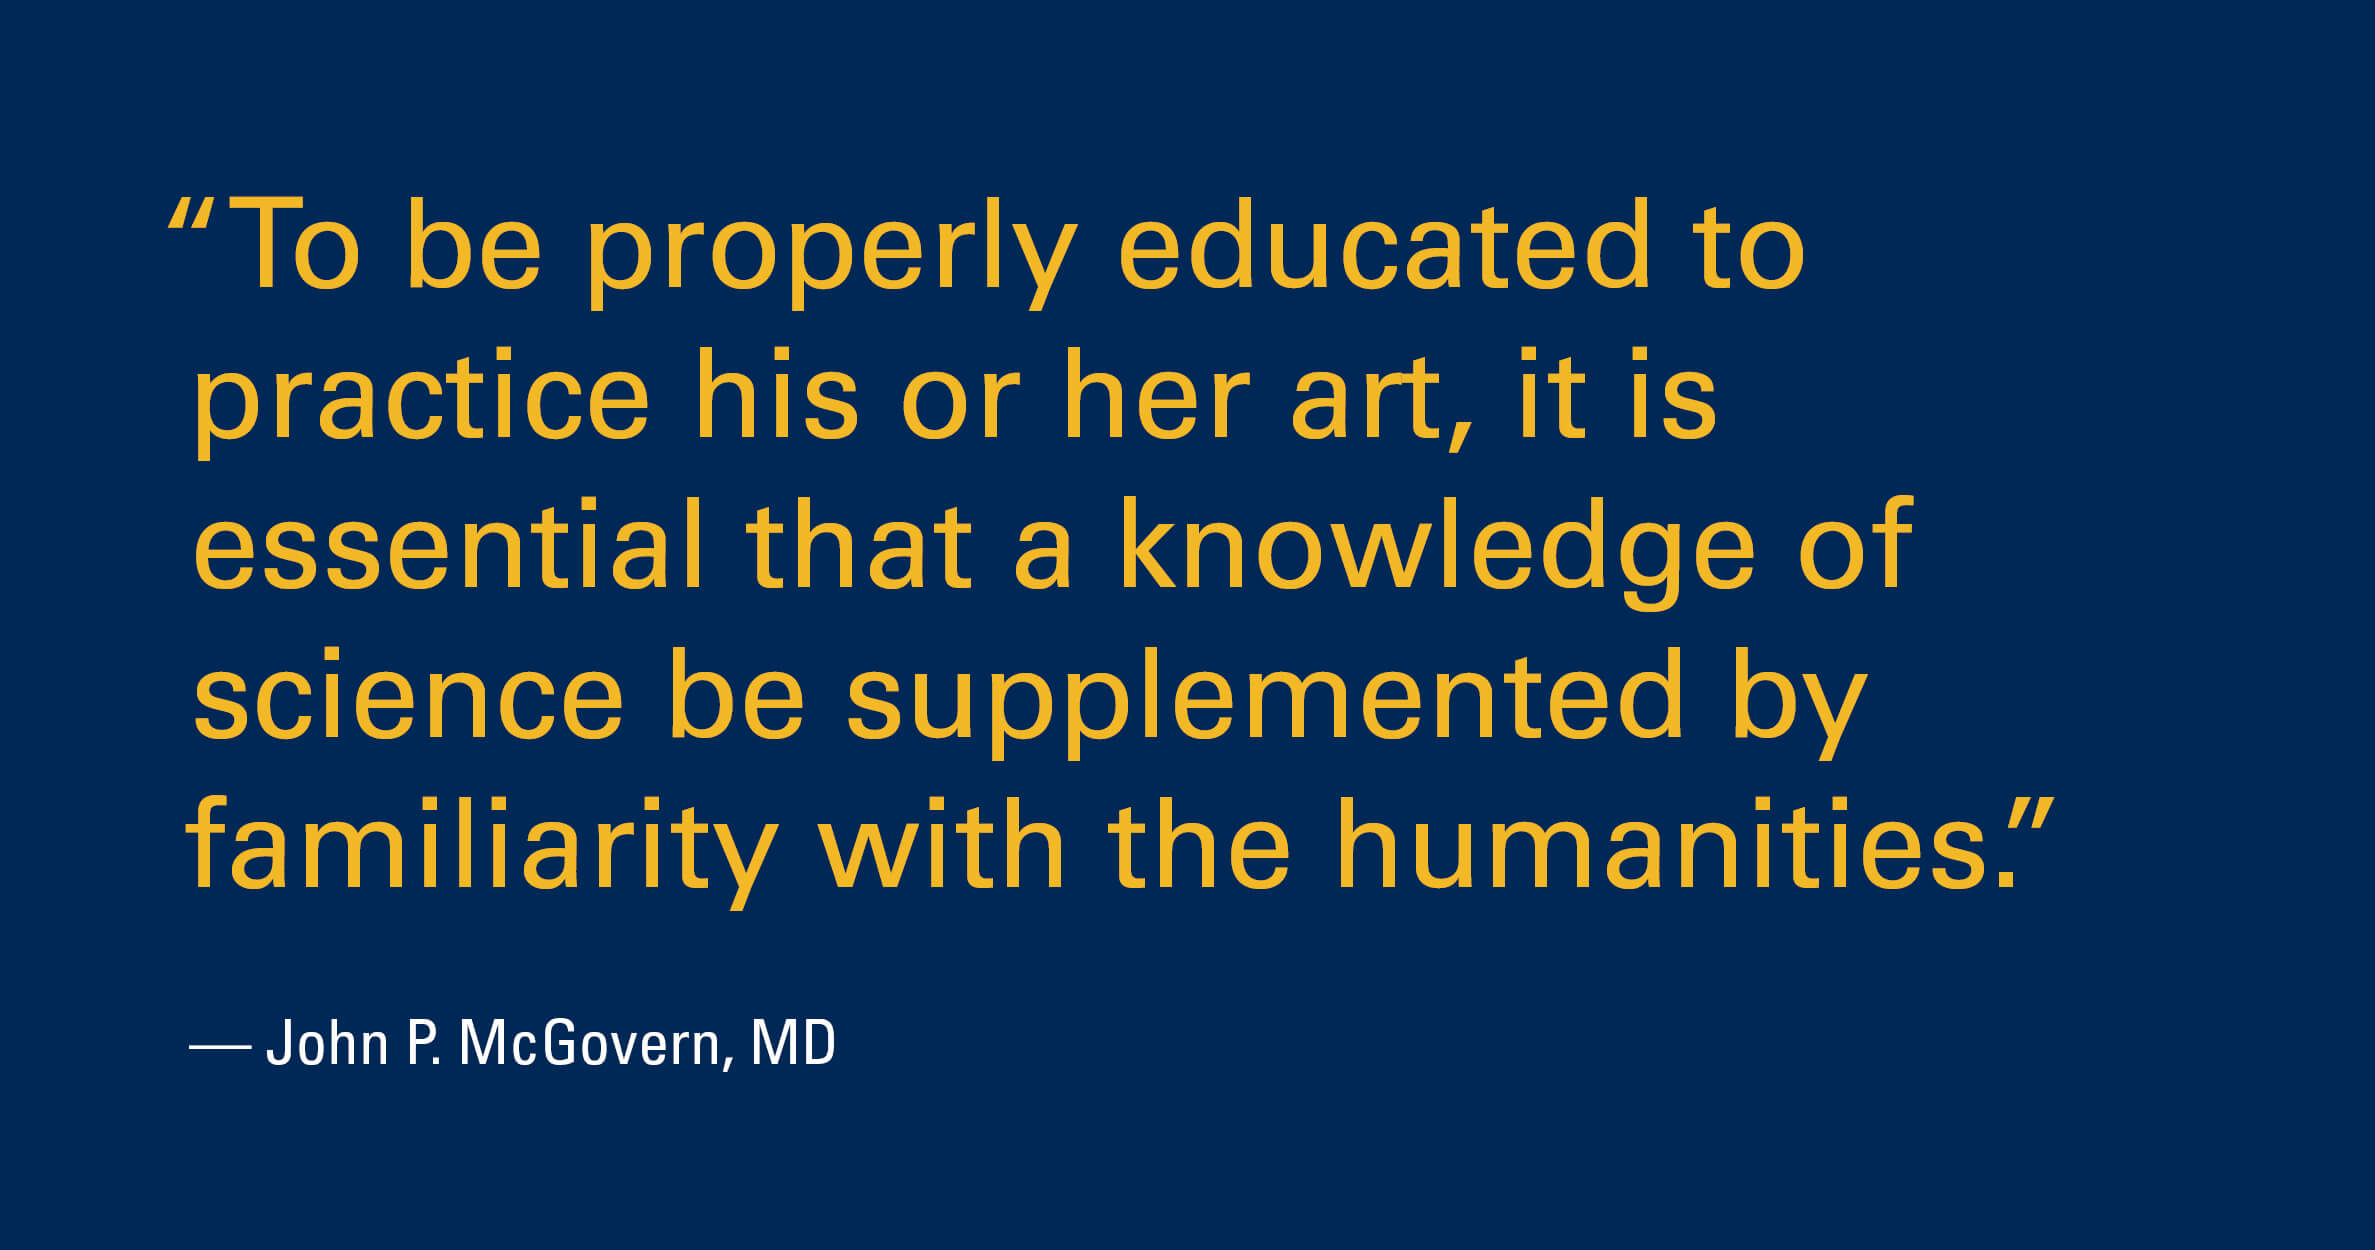 Quote by John P. McGovern, MD